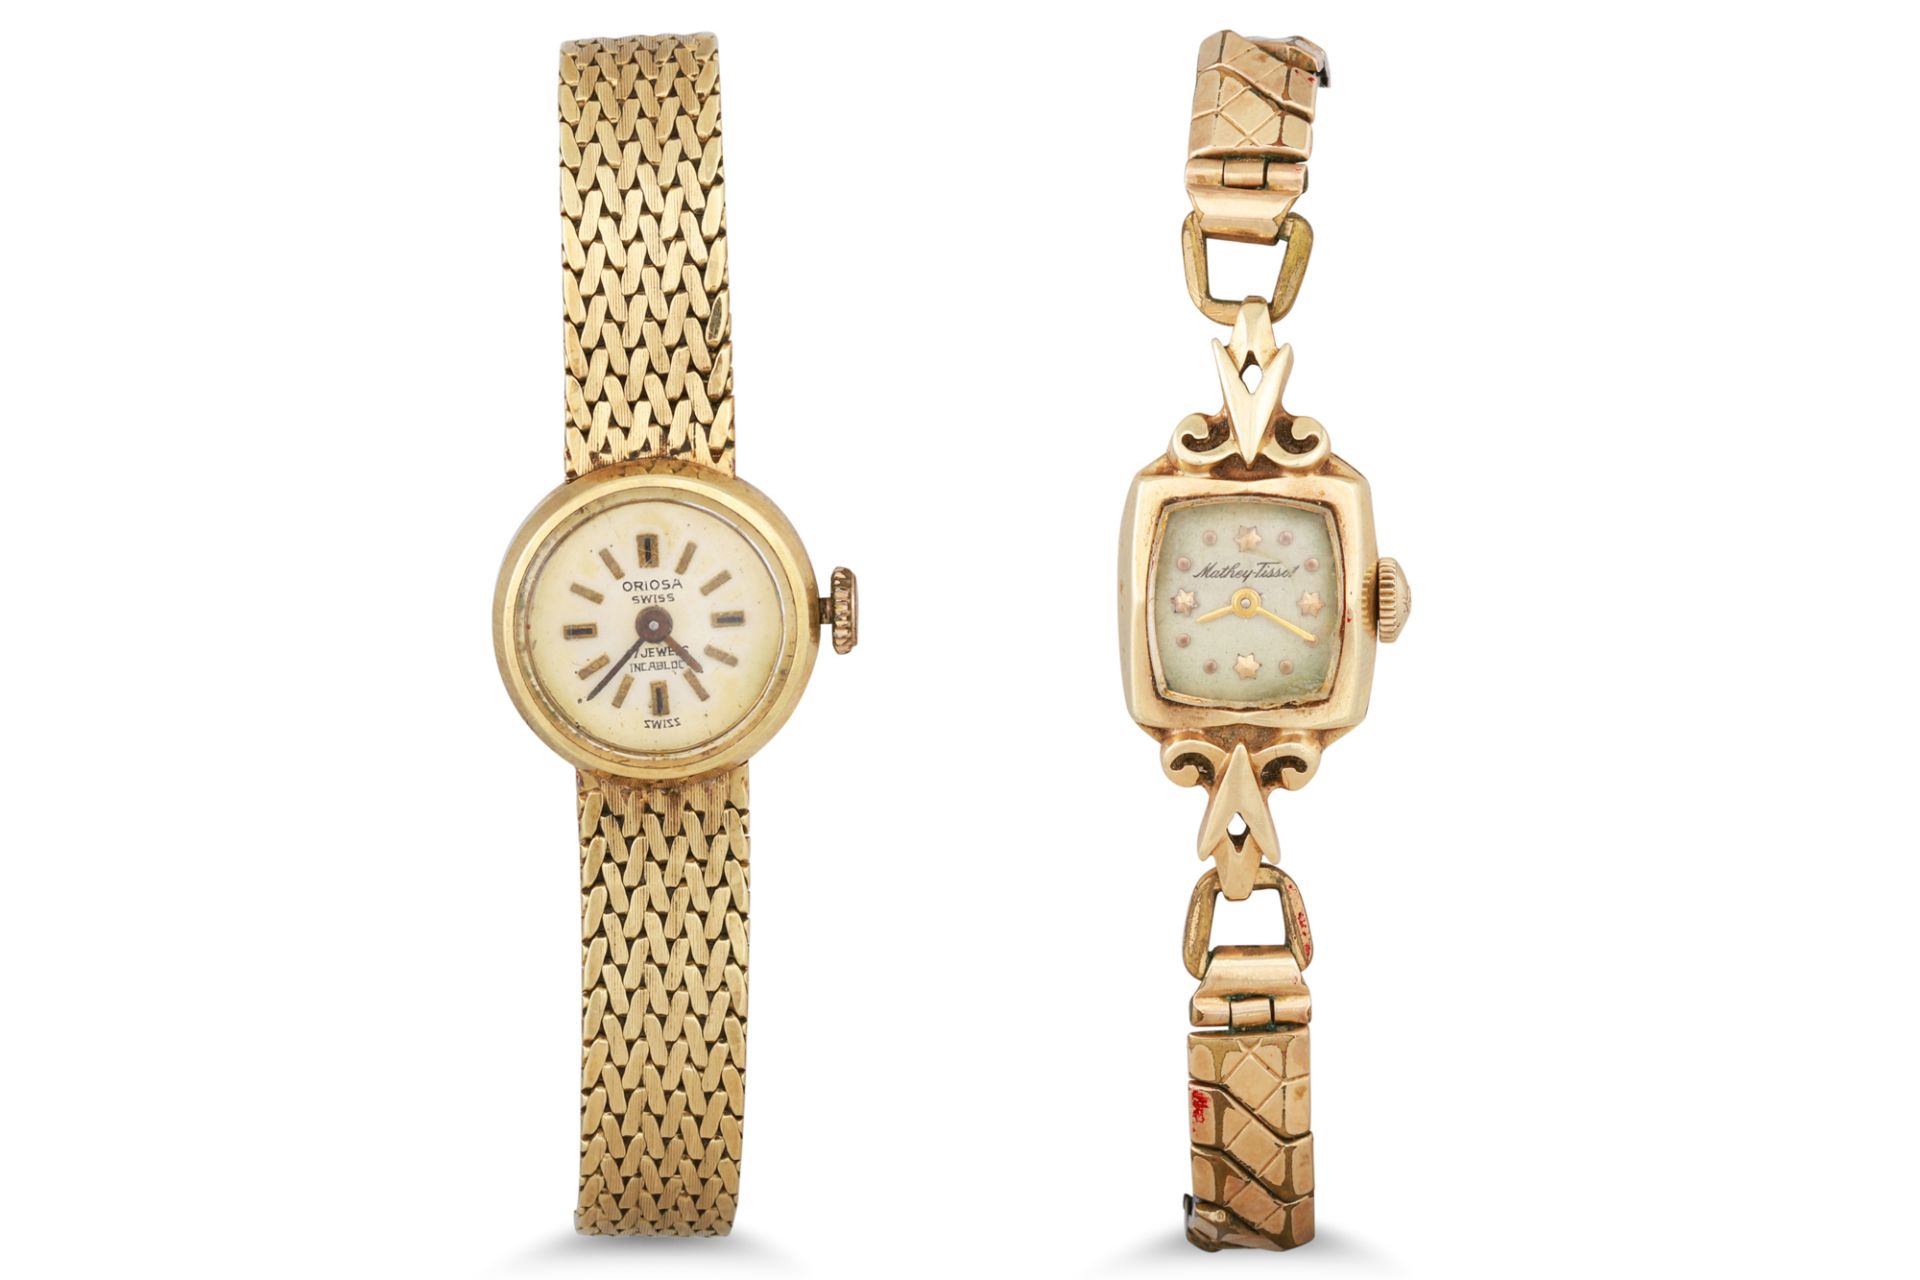 AN ORIOSA LADY'S 14CT GOLD 1960S WRISTWATCH, bracelet strap, gross weight 21.8 g. together with a